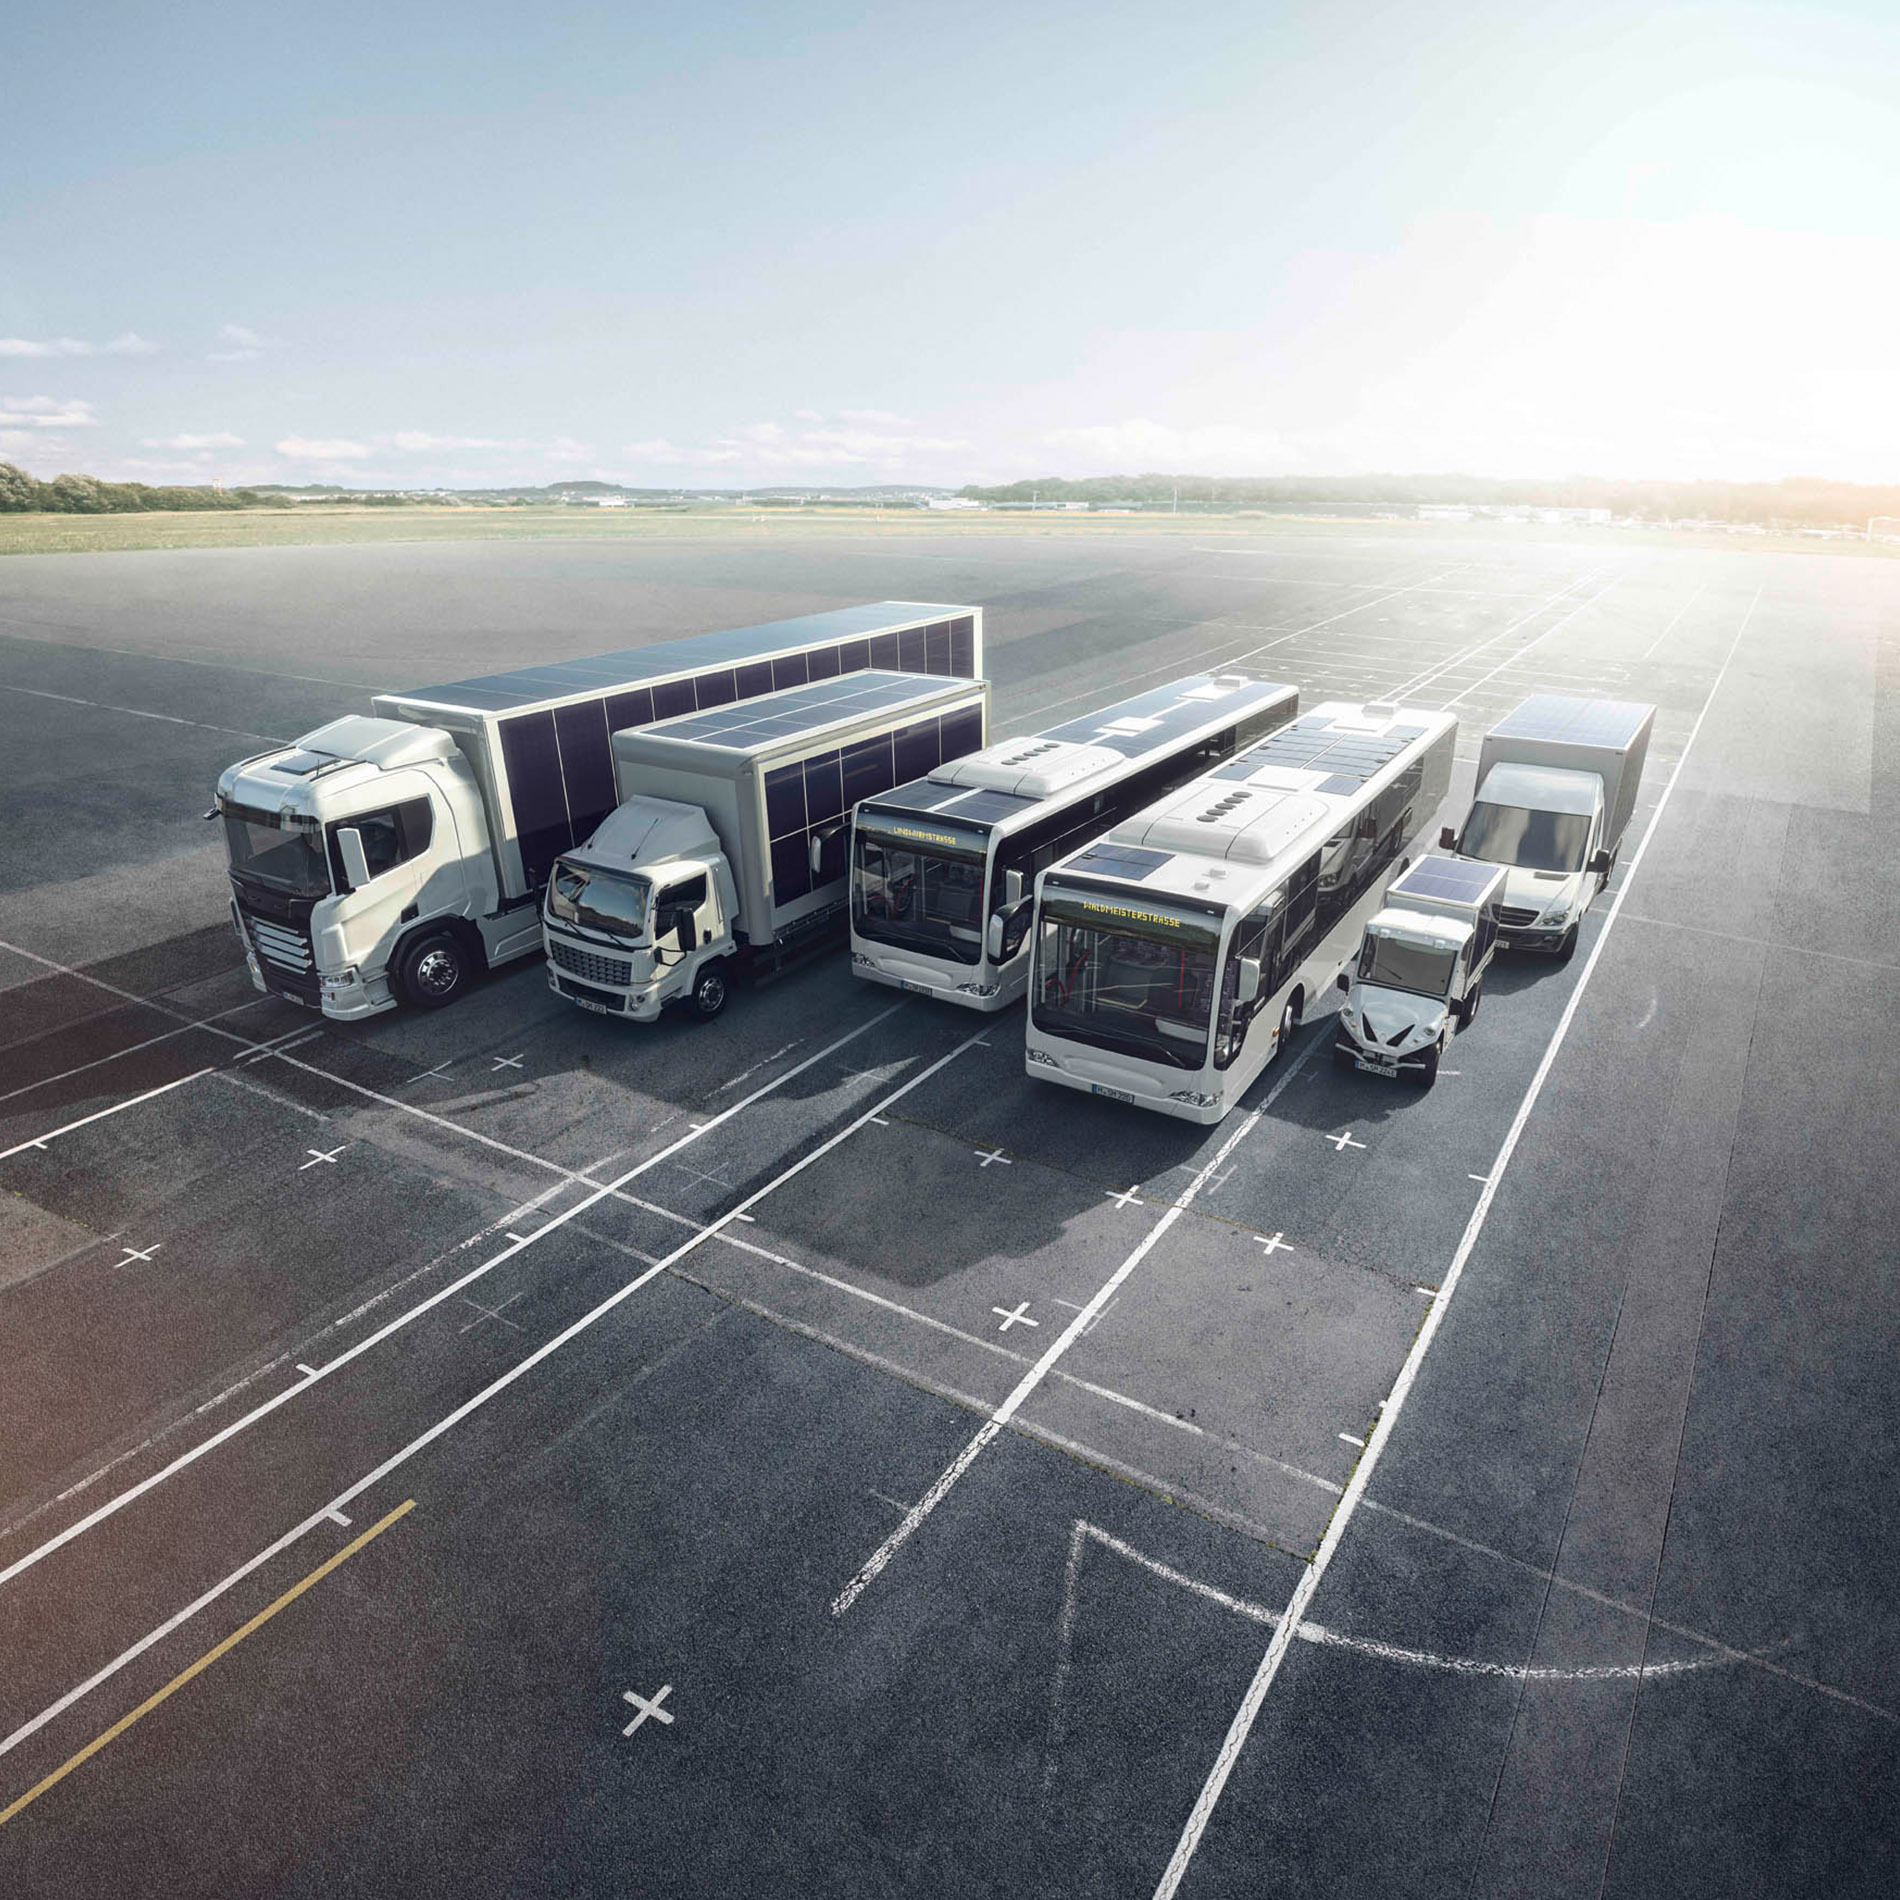 Sweden's Scania unveils world's first semi-truck covered in solar